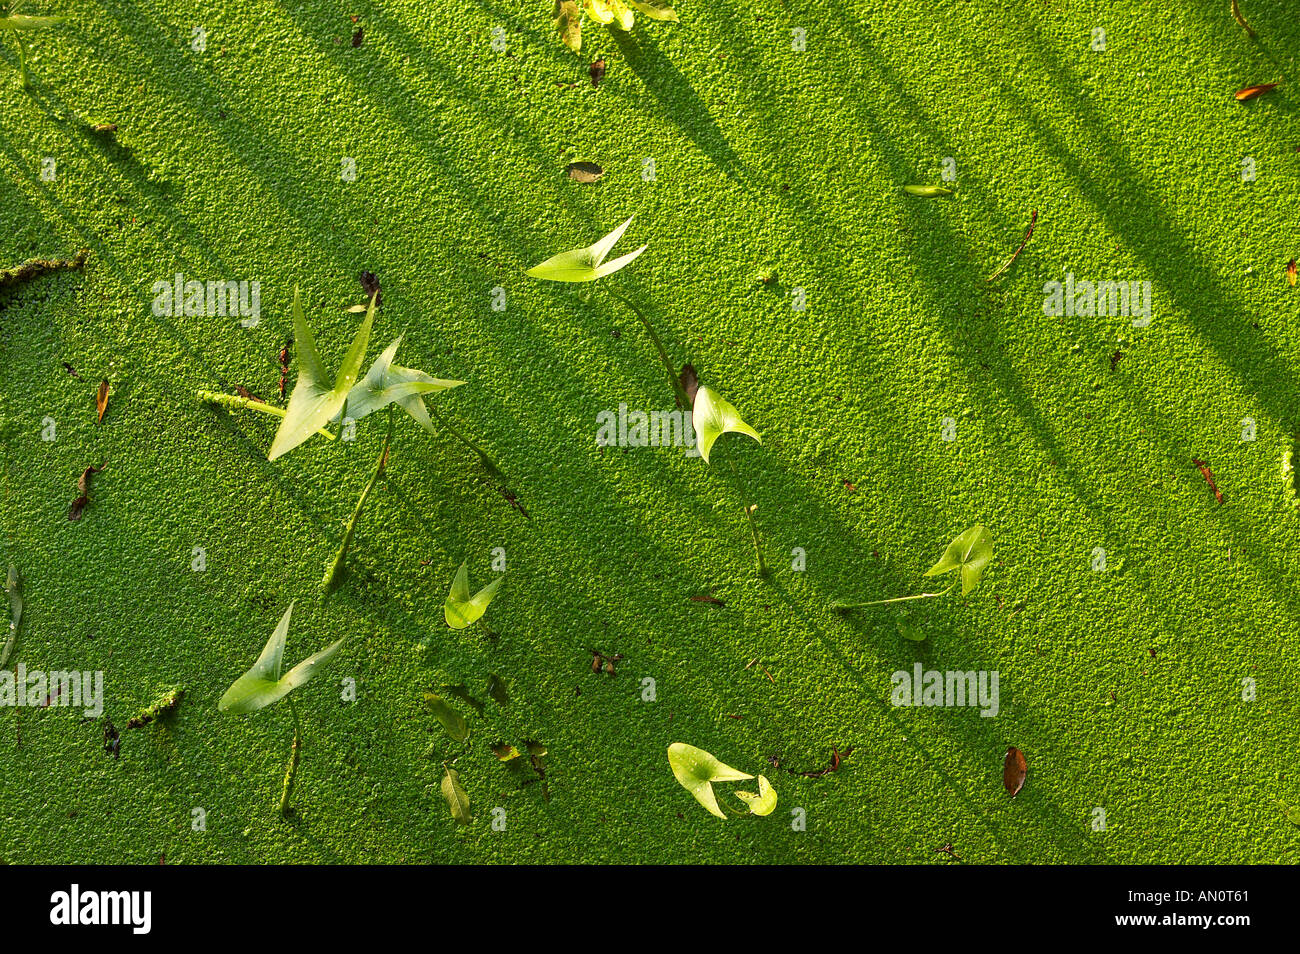 details of shadows on the surface of a stagnant river with pond weed Sturminster Newton Dorset England UK Stock Photo